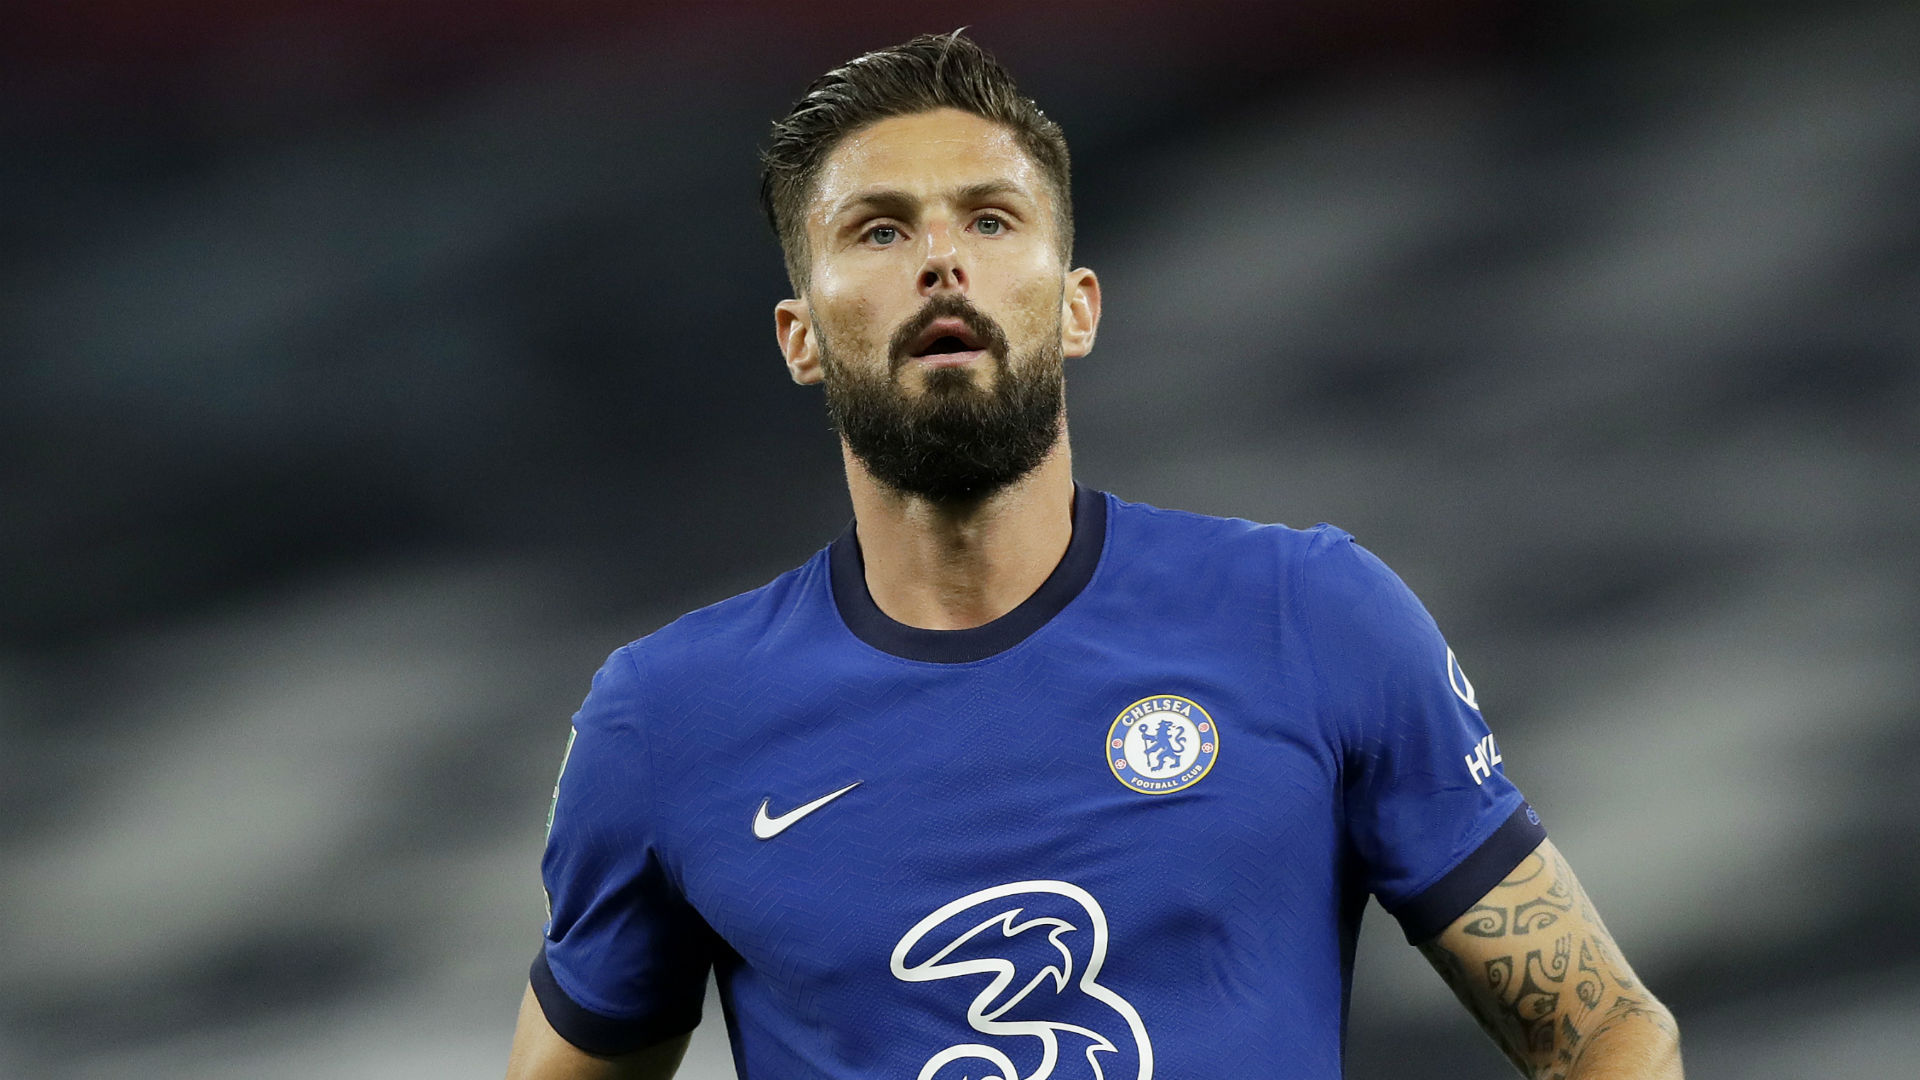 'I really want to win the Premier League' - Chelsea can still join 2020-21 title race, says Giroud